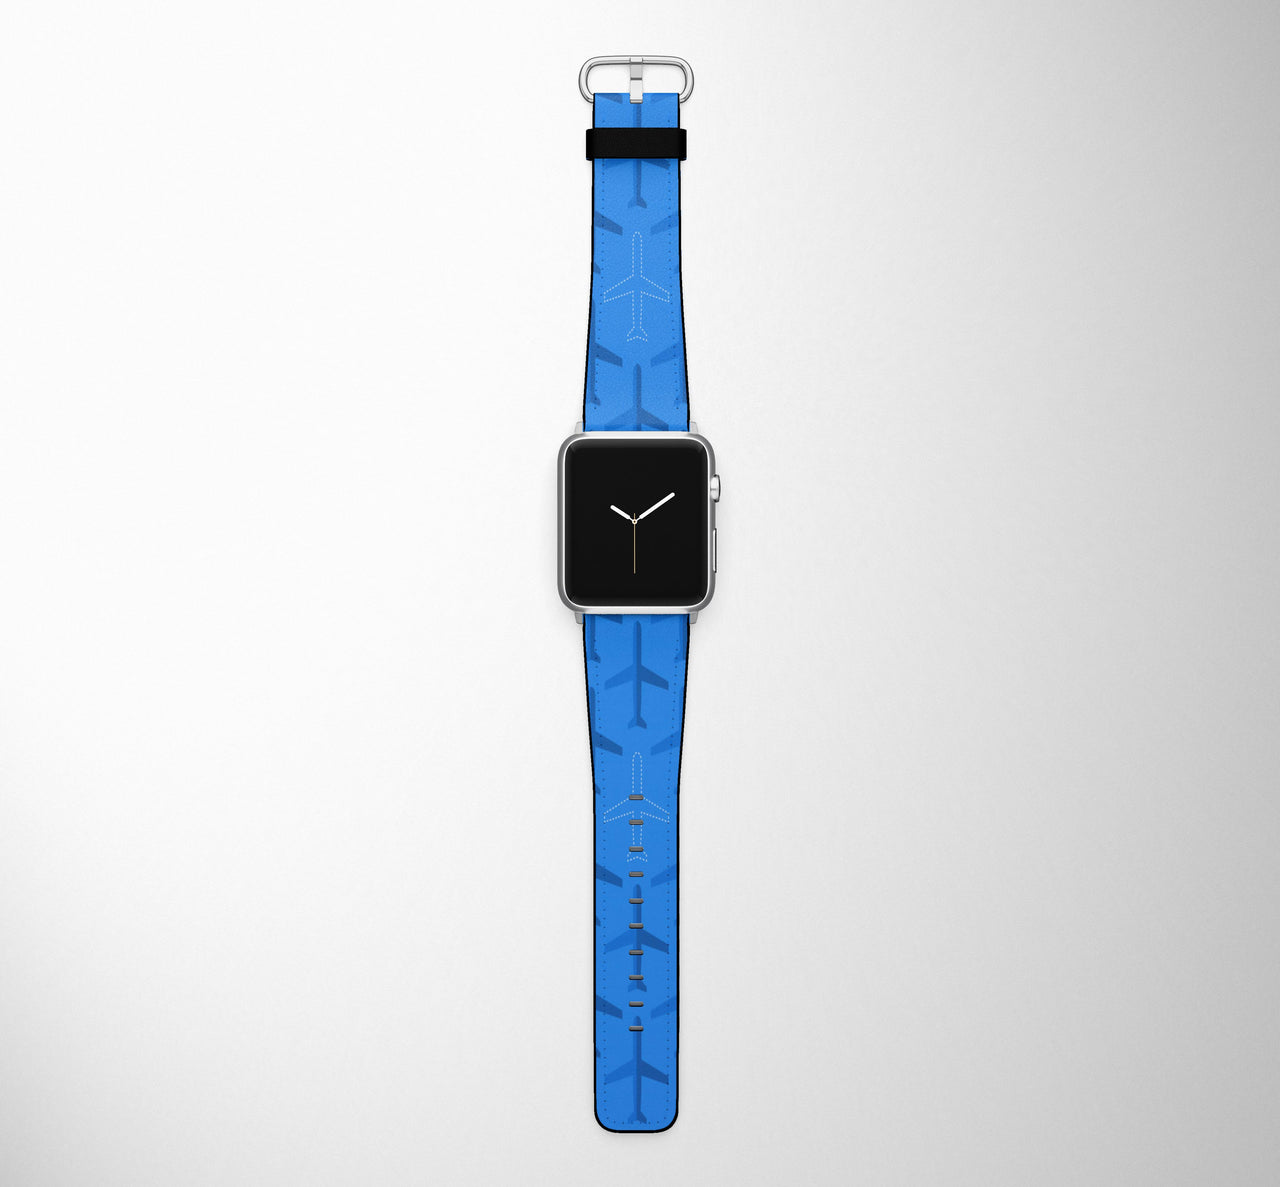 Blue Seamless Airplanes Designed Leather Apple Watch Straps